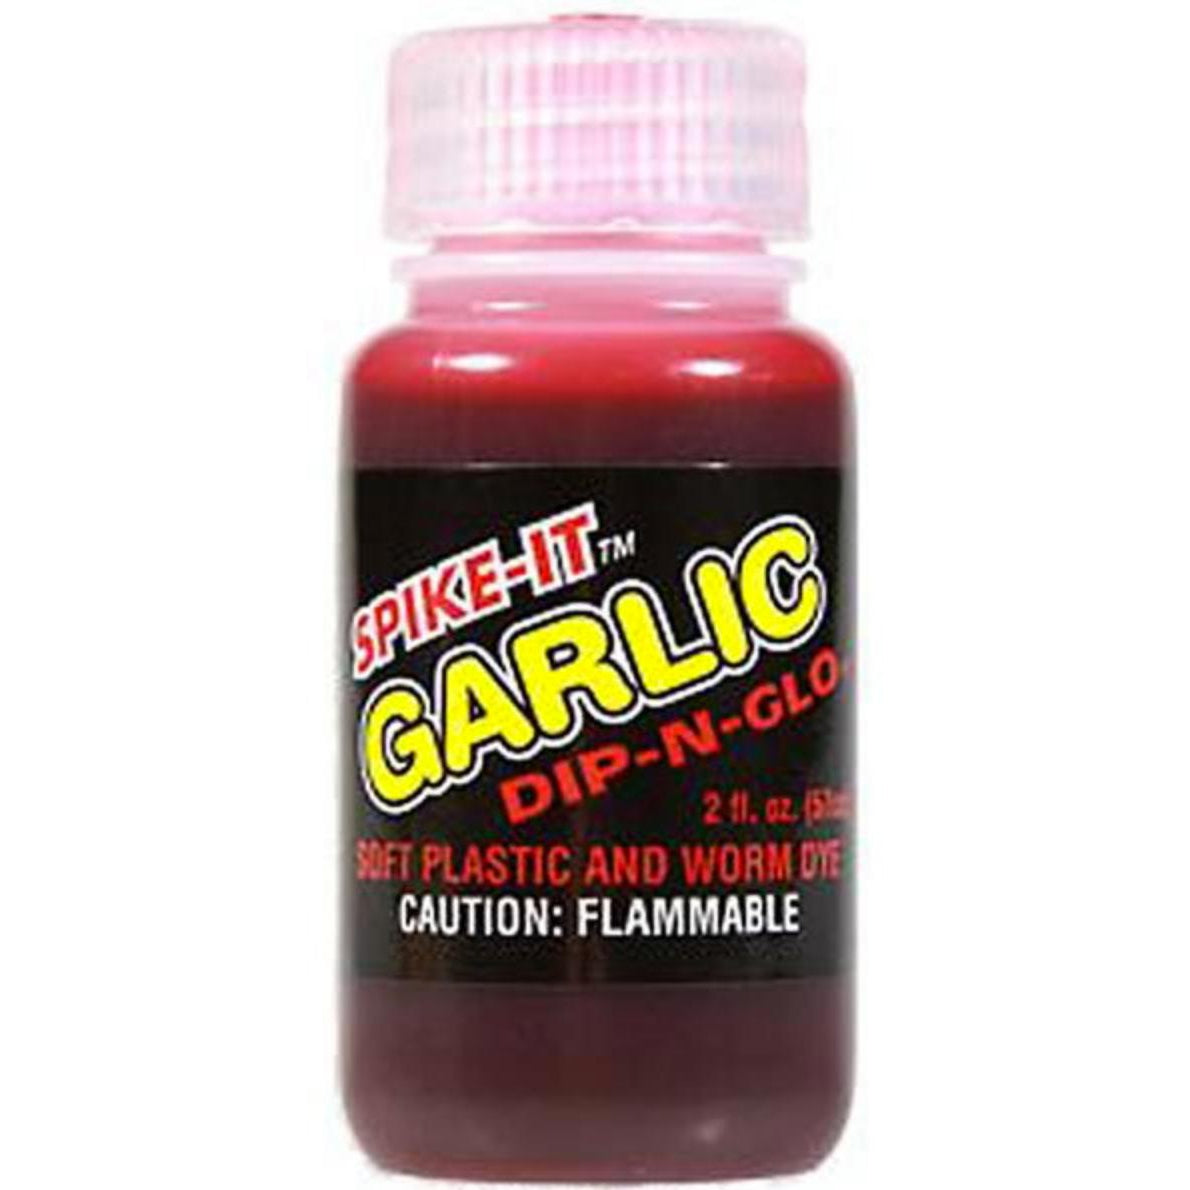 Garlic scent fire red